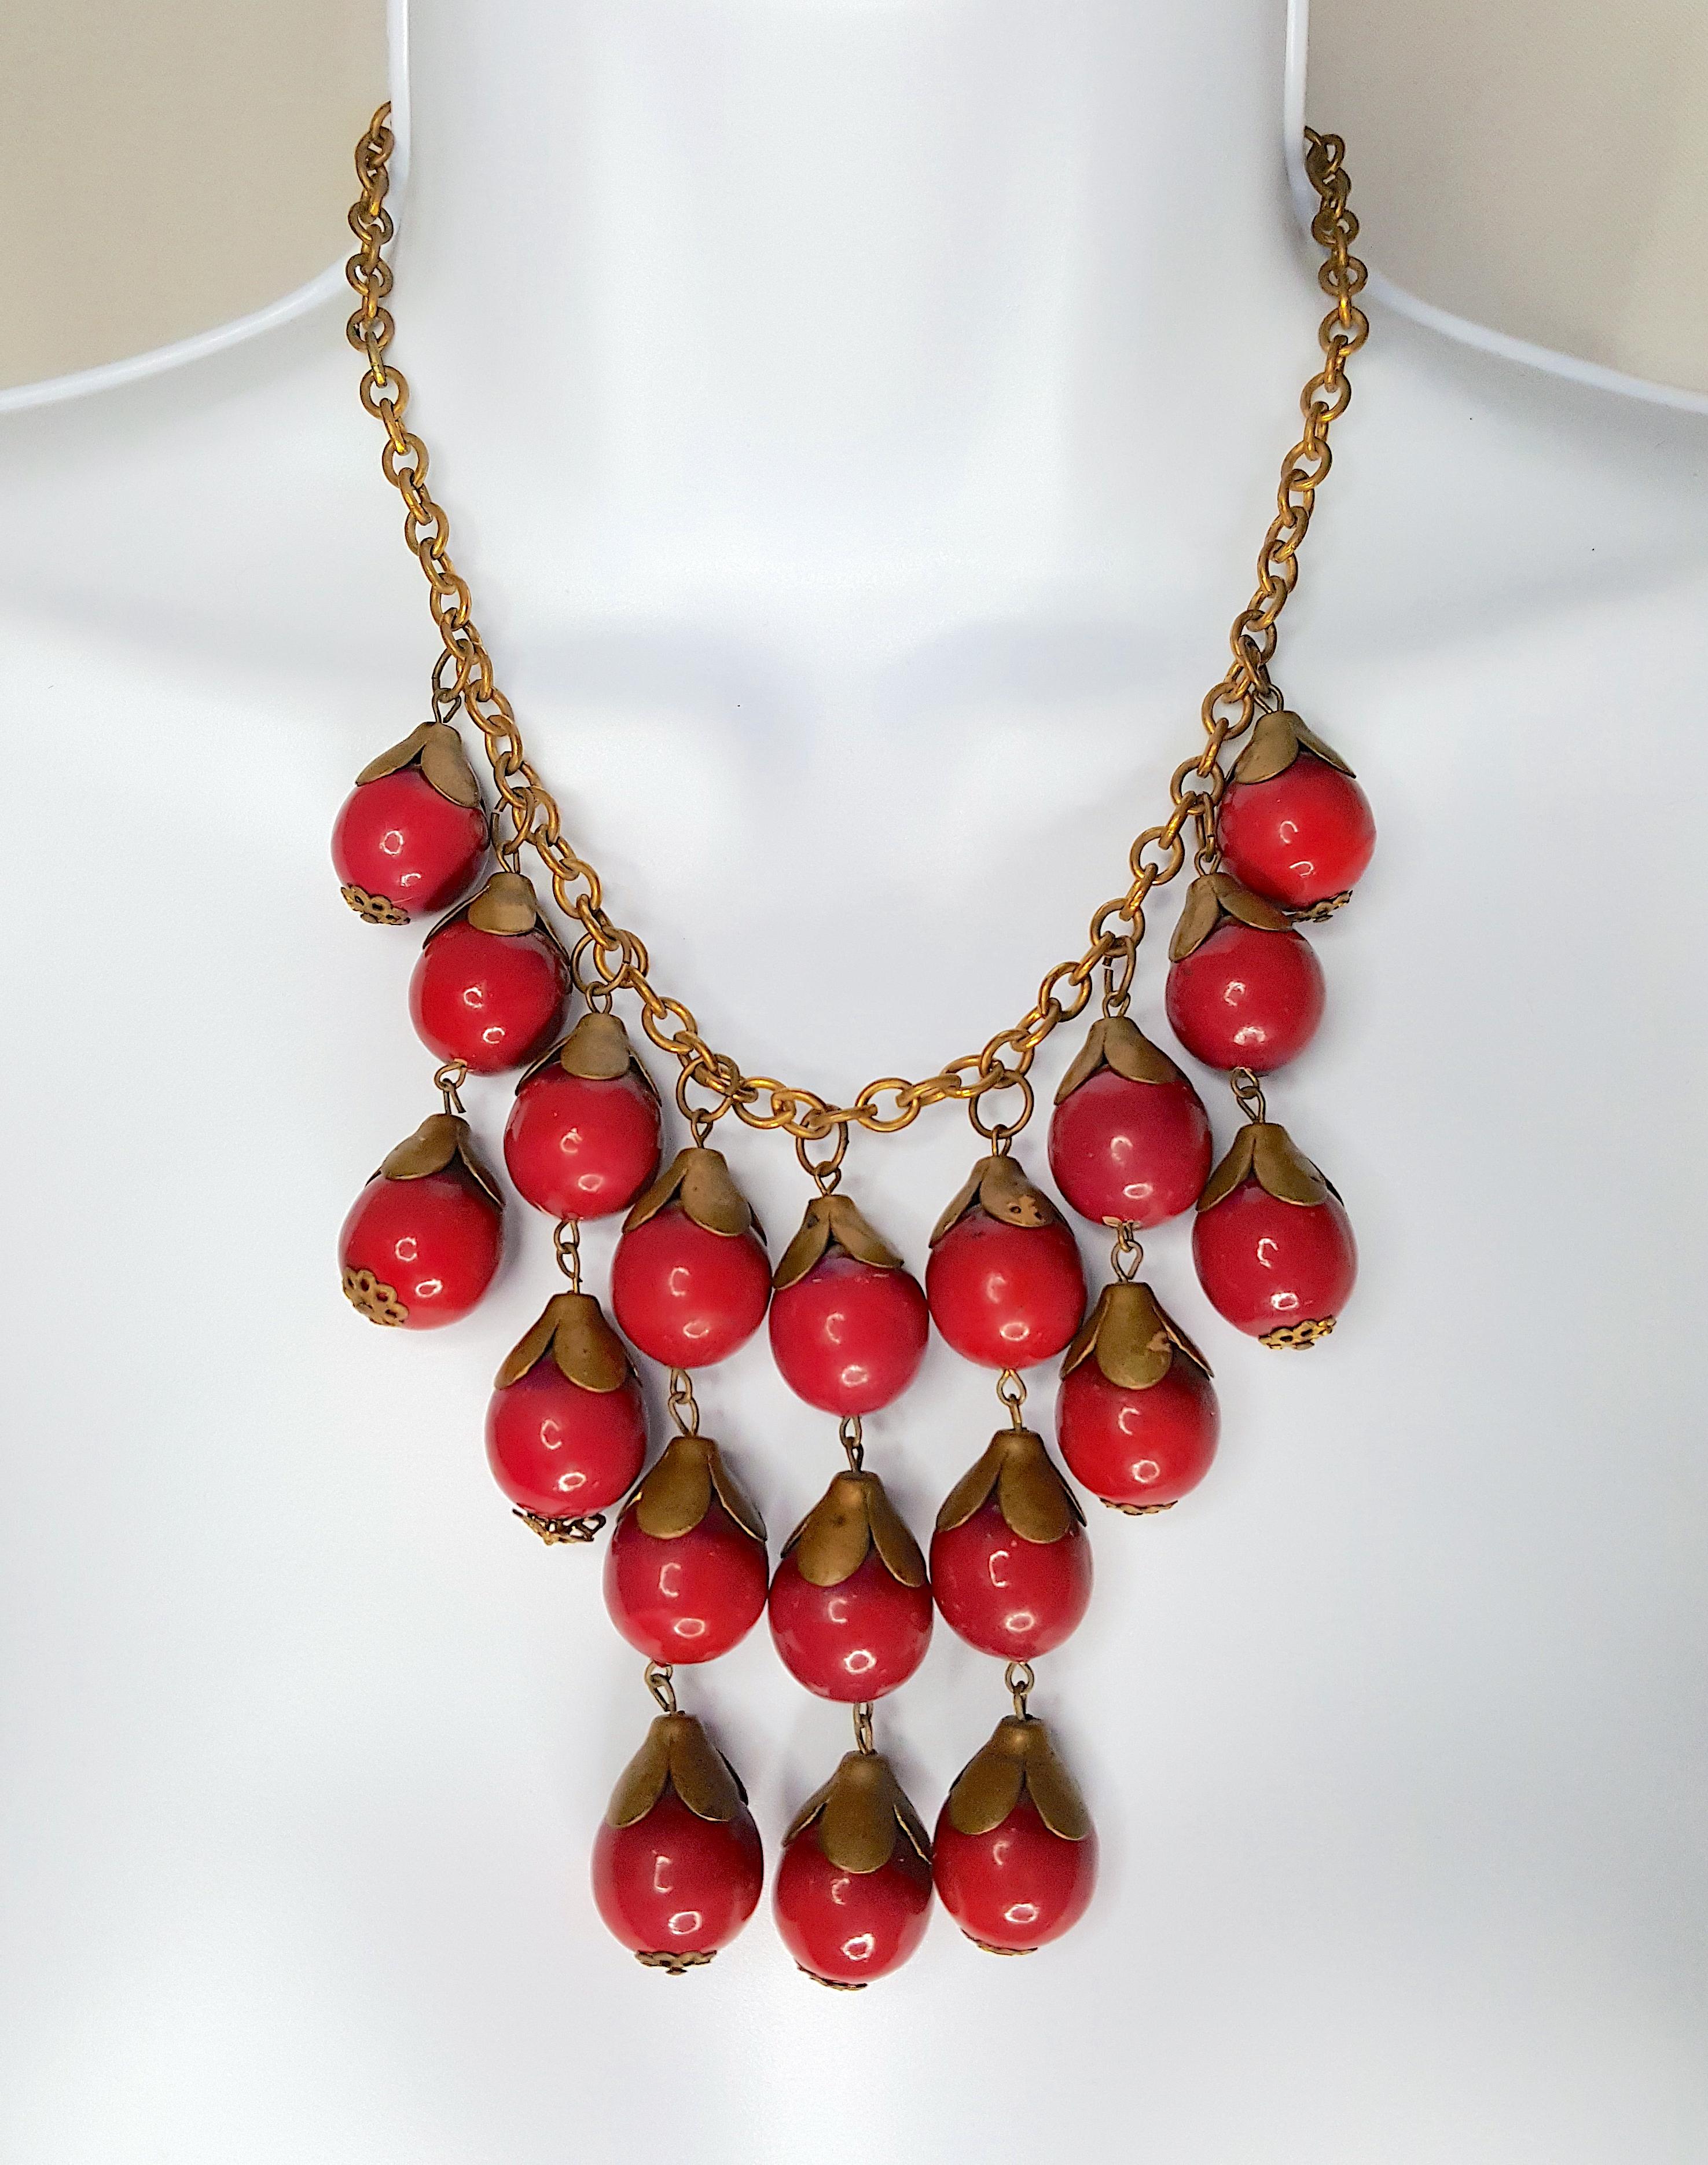 With an organic flora motif characteristic of American Miriam Haskell's first designer Frank Hess, this 1930s Russian-gilt brass oval-link chain necklace features a tiered bib of free-hanging various-length strands of fruit-like red-enameled beads